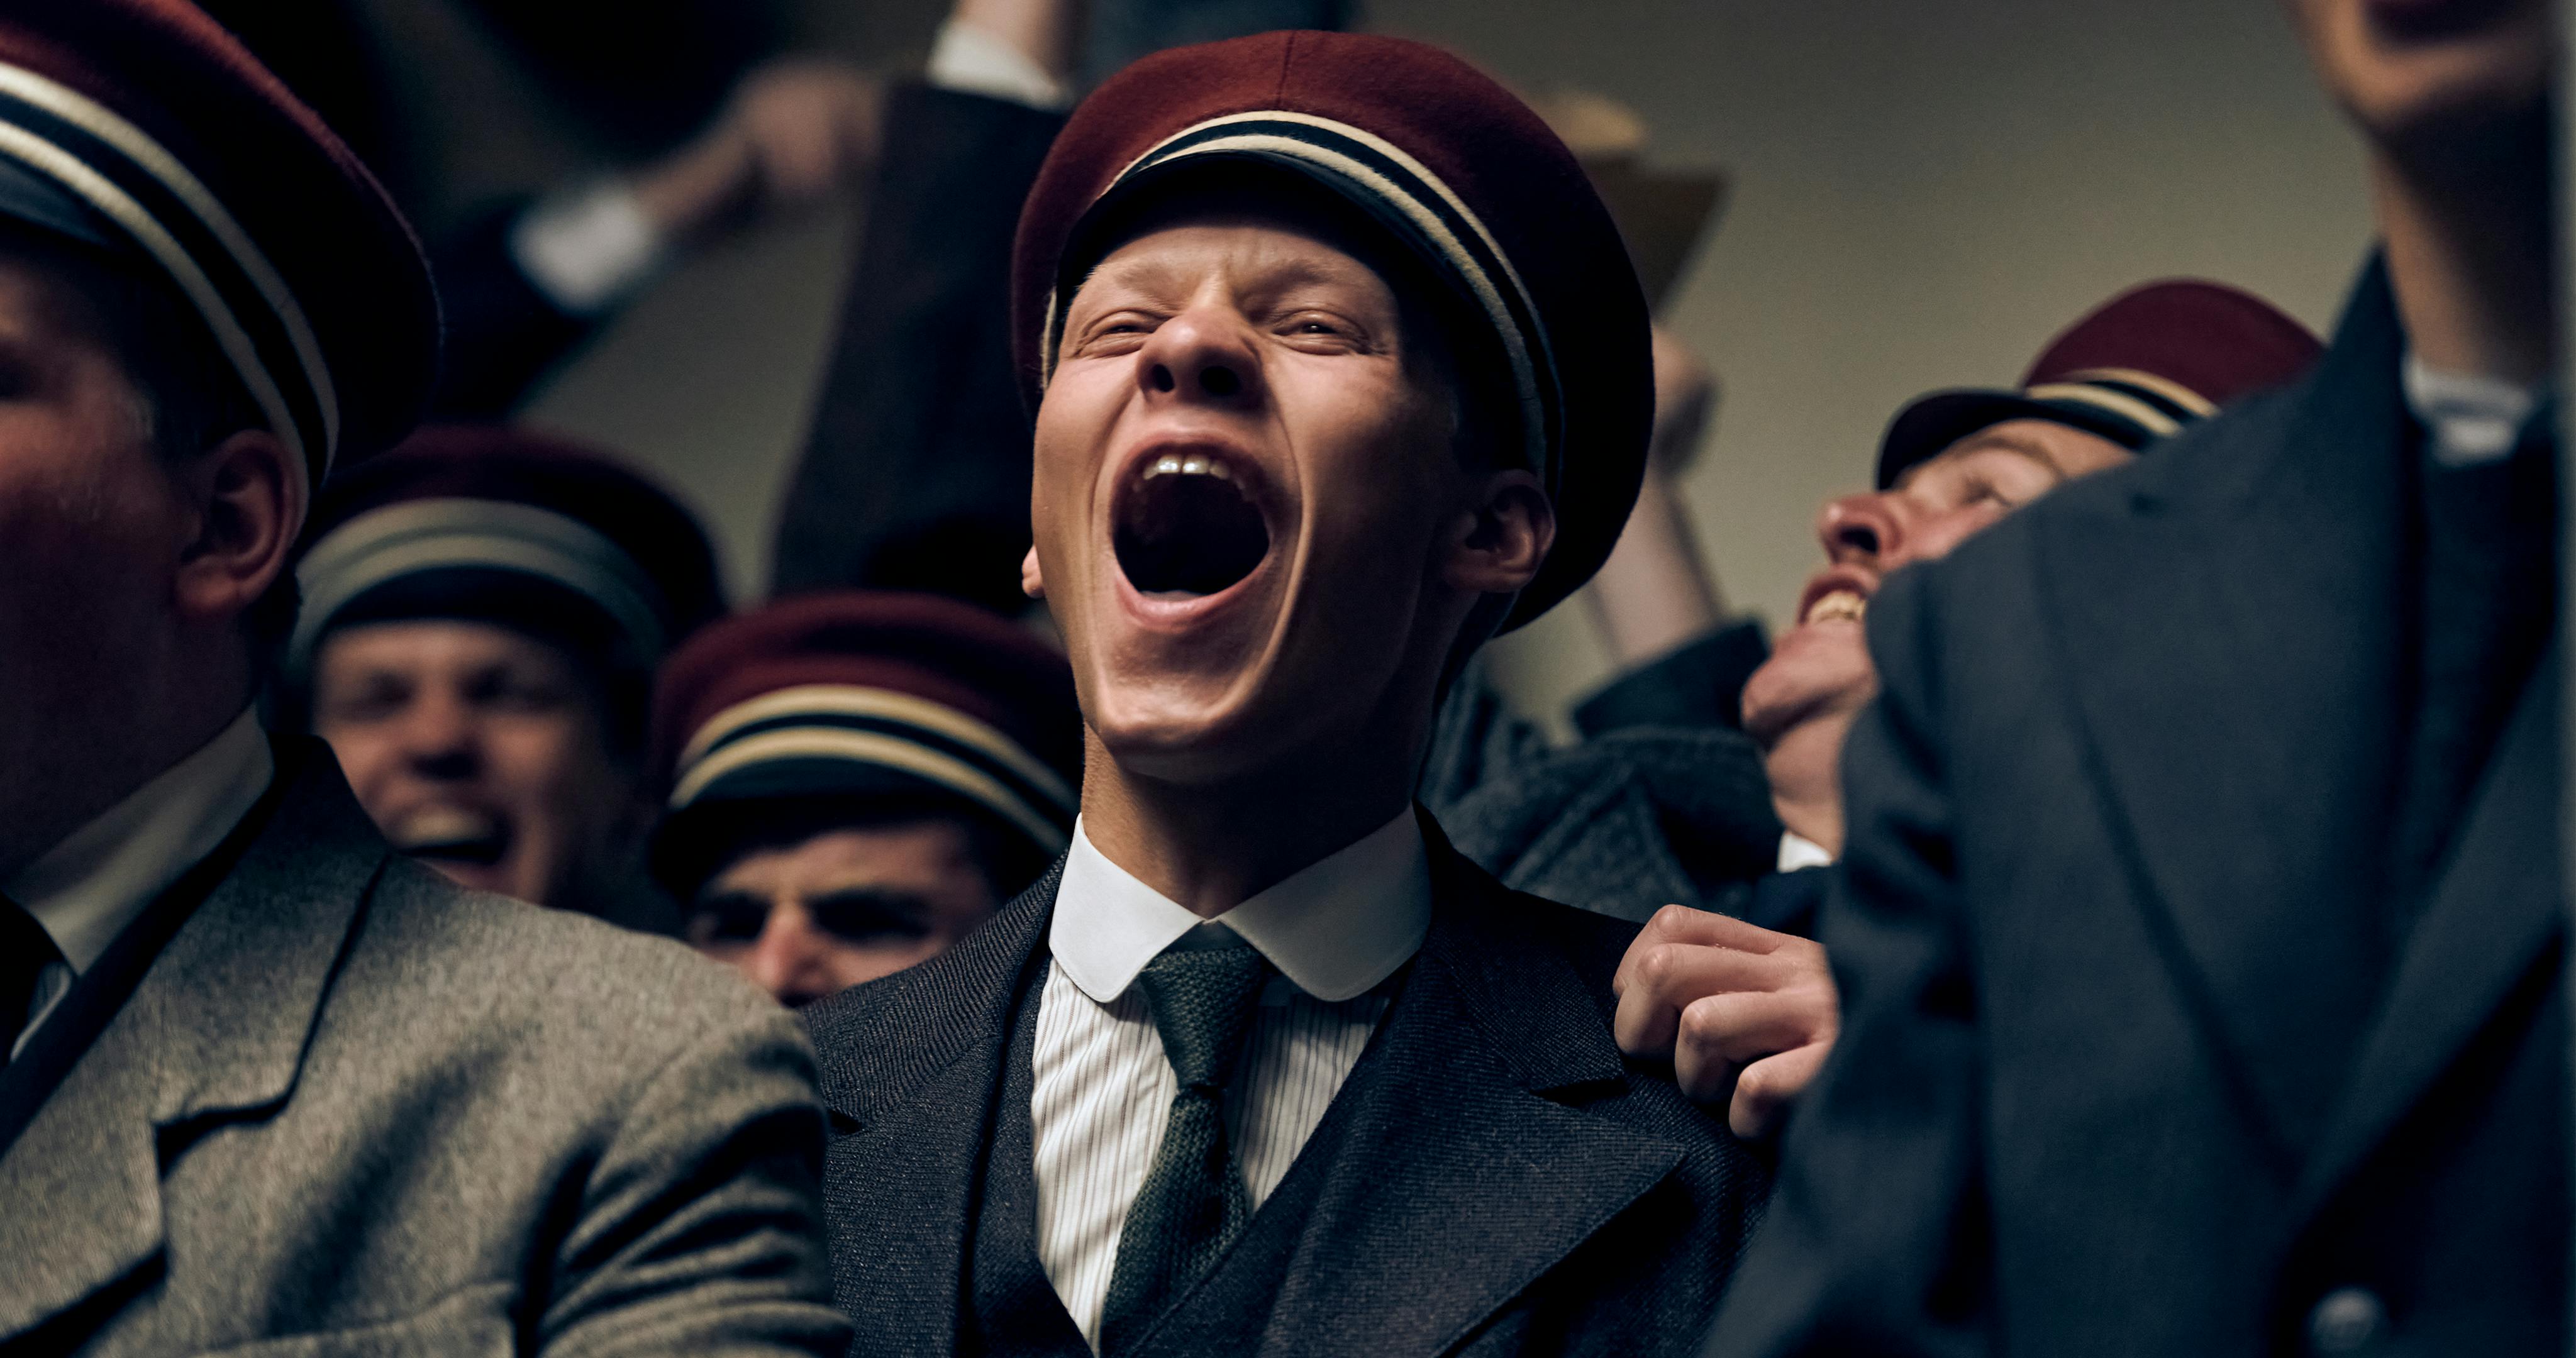 Paul Bäumer (Felix Kammerer) wears a black suit and tie and a red hat. His mouth is wide open as he cheers, in a pack of other cheering men. 